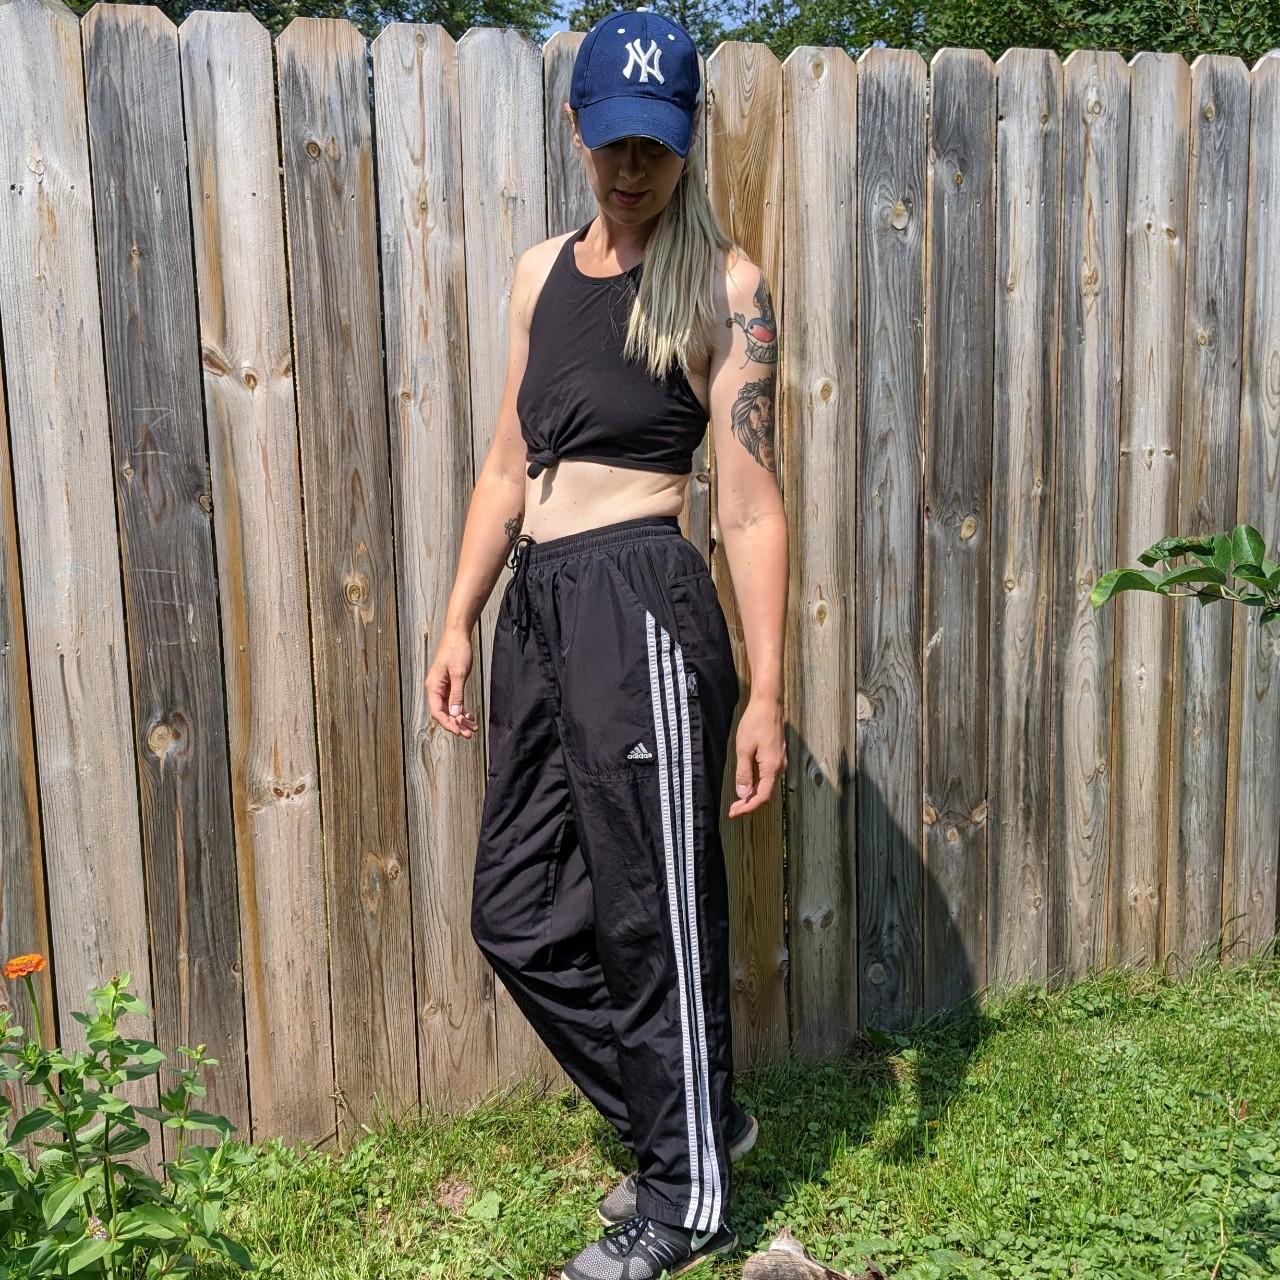 90s Style With A Twist: adidas Track Pants & Matching Jacket - The Mom Edit